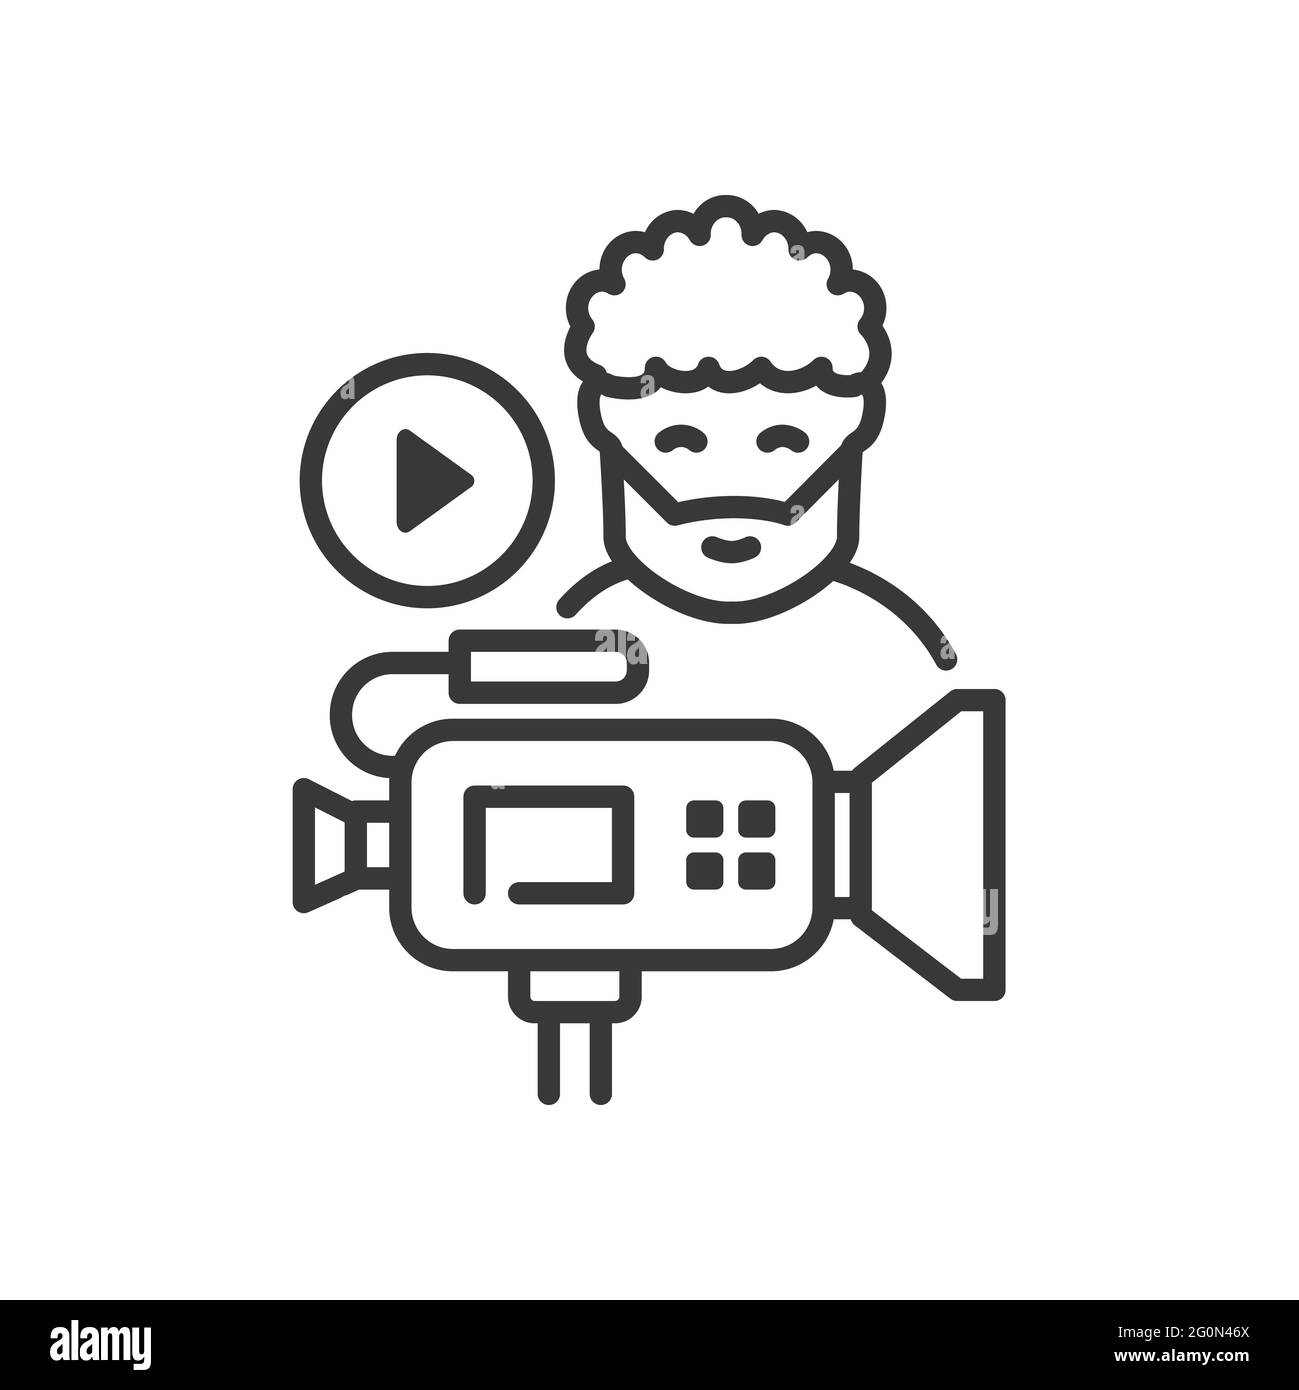 Videoblog - vector line design single isolated icon on white background. High quality black pictogram. Image of a blogger, videographer with a camera. Stock Vector